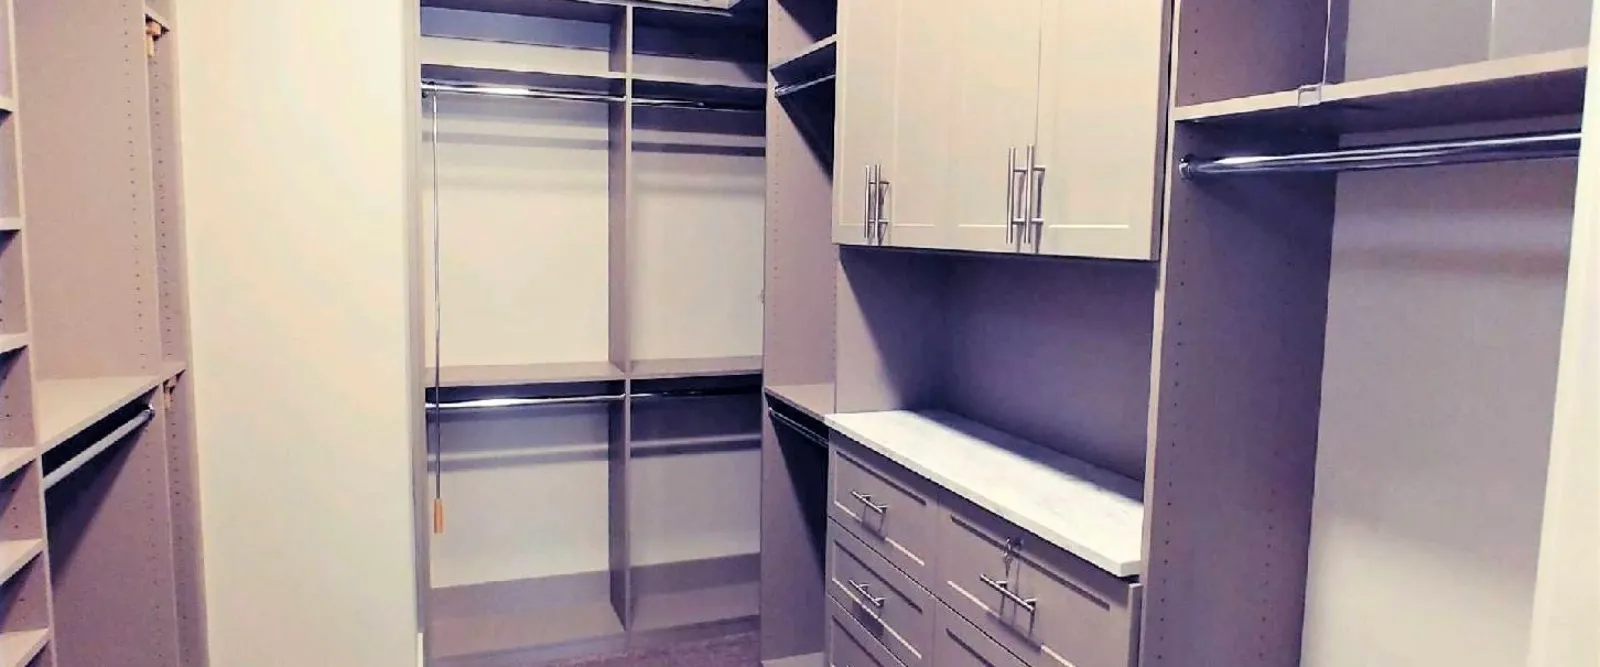 Storage system in a large walk-in closet